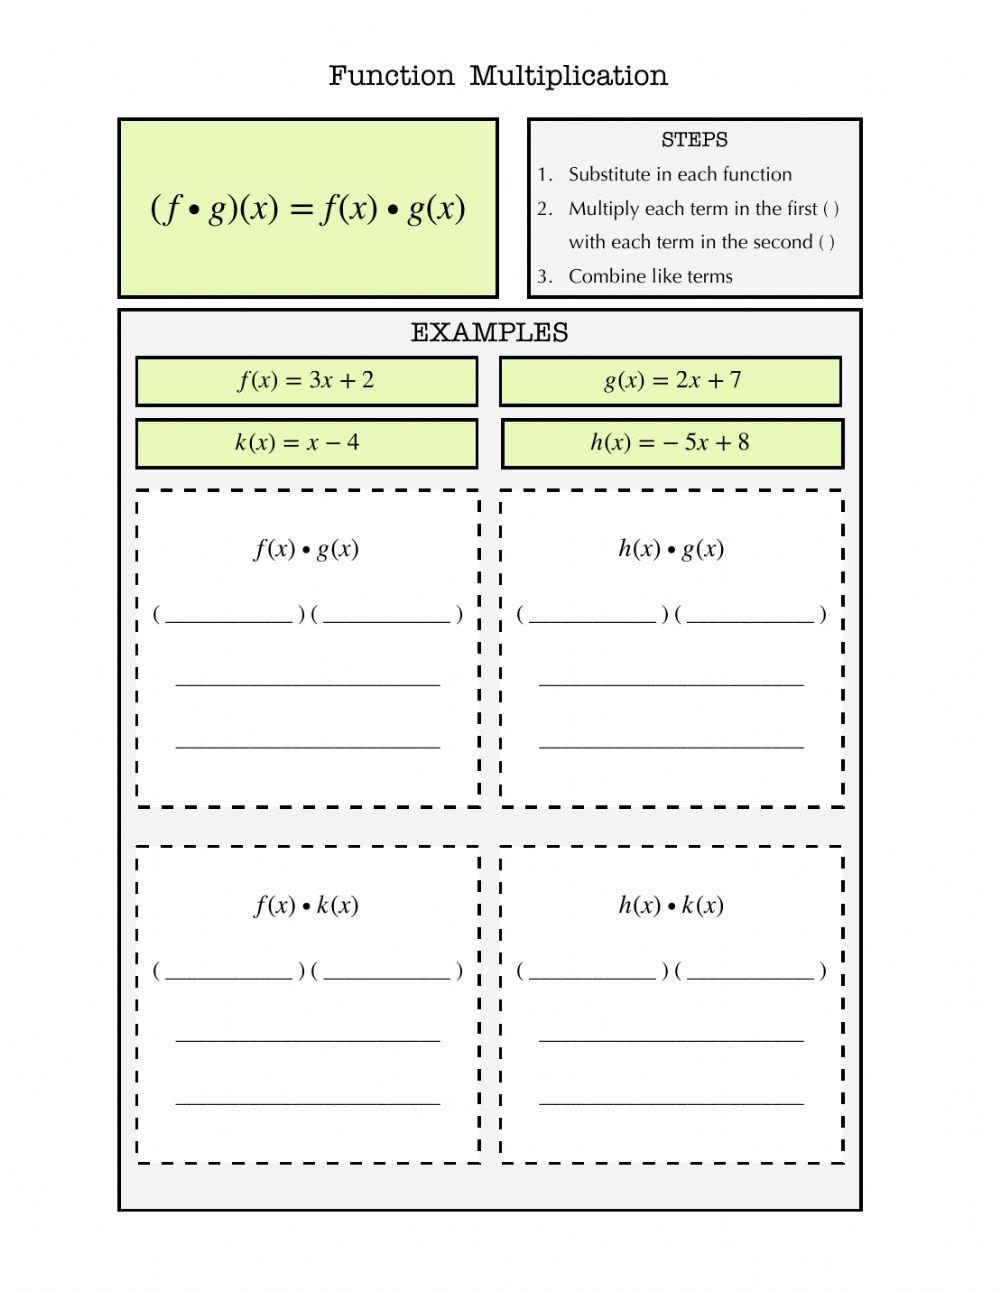 Function Multiplication Notes